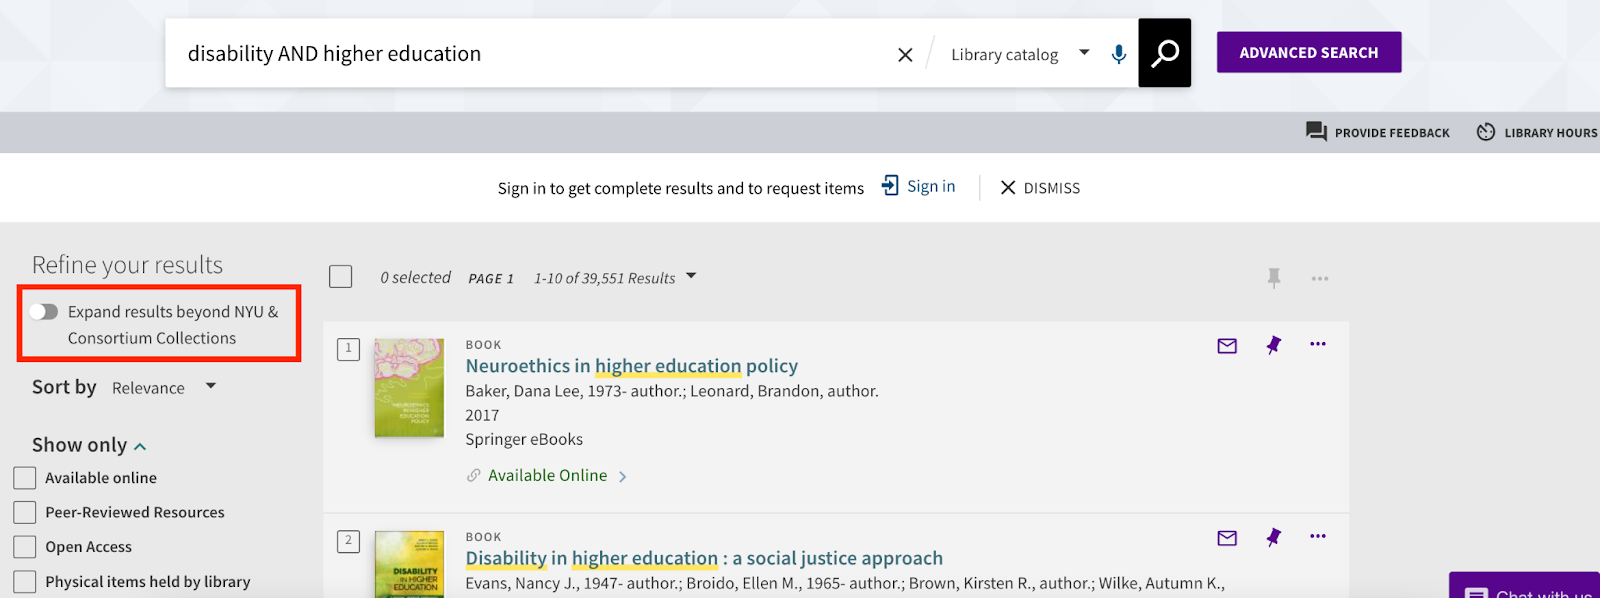 Results page for the search phrase "disability AND higher education". At the top of the filter options is a toggle to Expand results beyond NYU & Consortium Collections, highlighted in a red box.